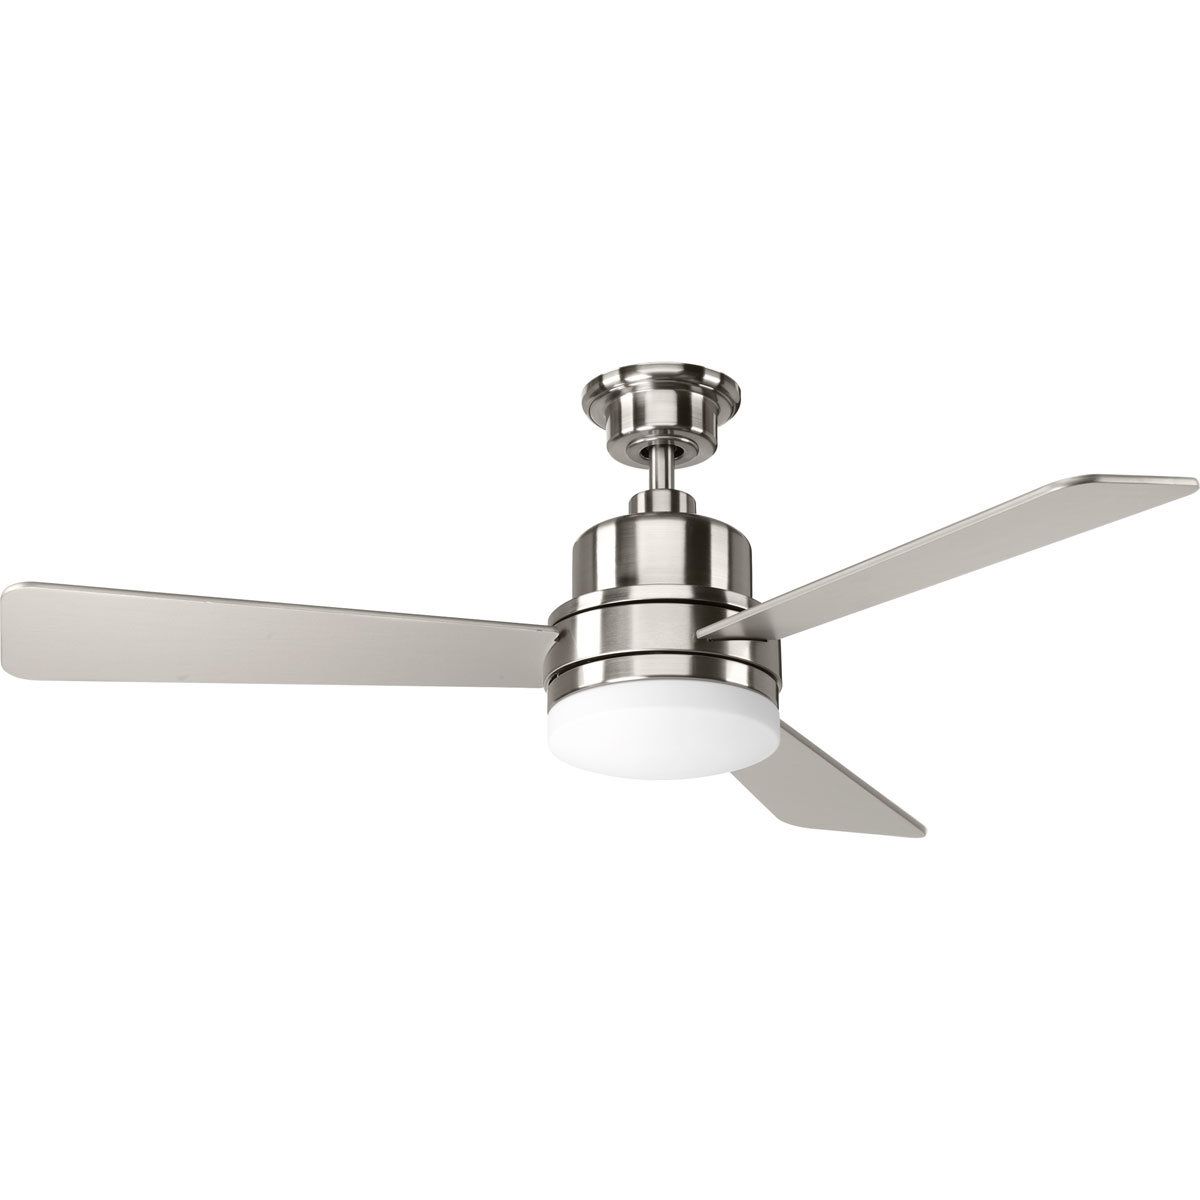 Widely Used Nikki 3 Blade Ceiling Fans Inside 52" Rathburn 3 Blade Ceiling Fan, Light Kit Included (View 8 of 20)